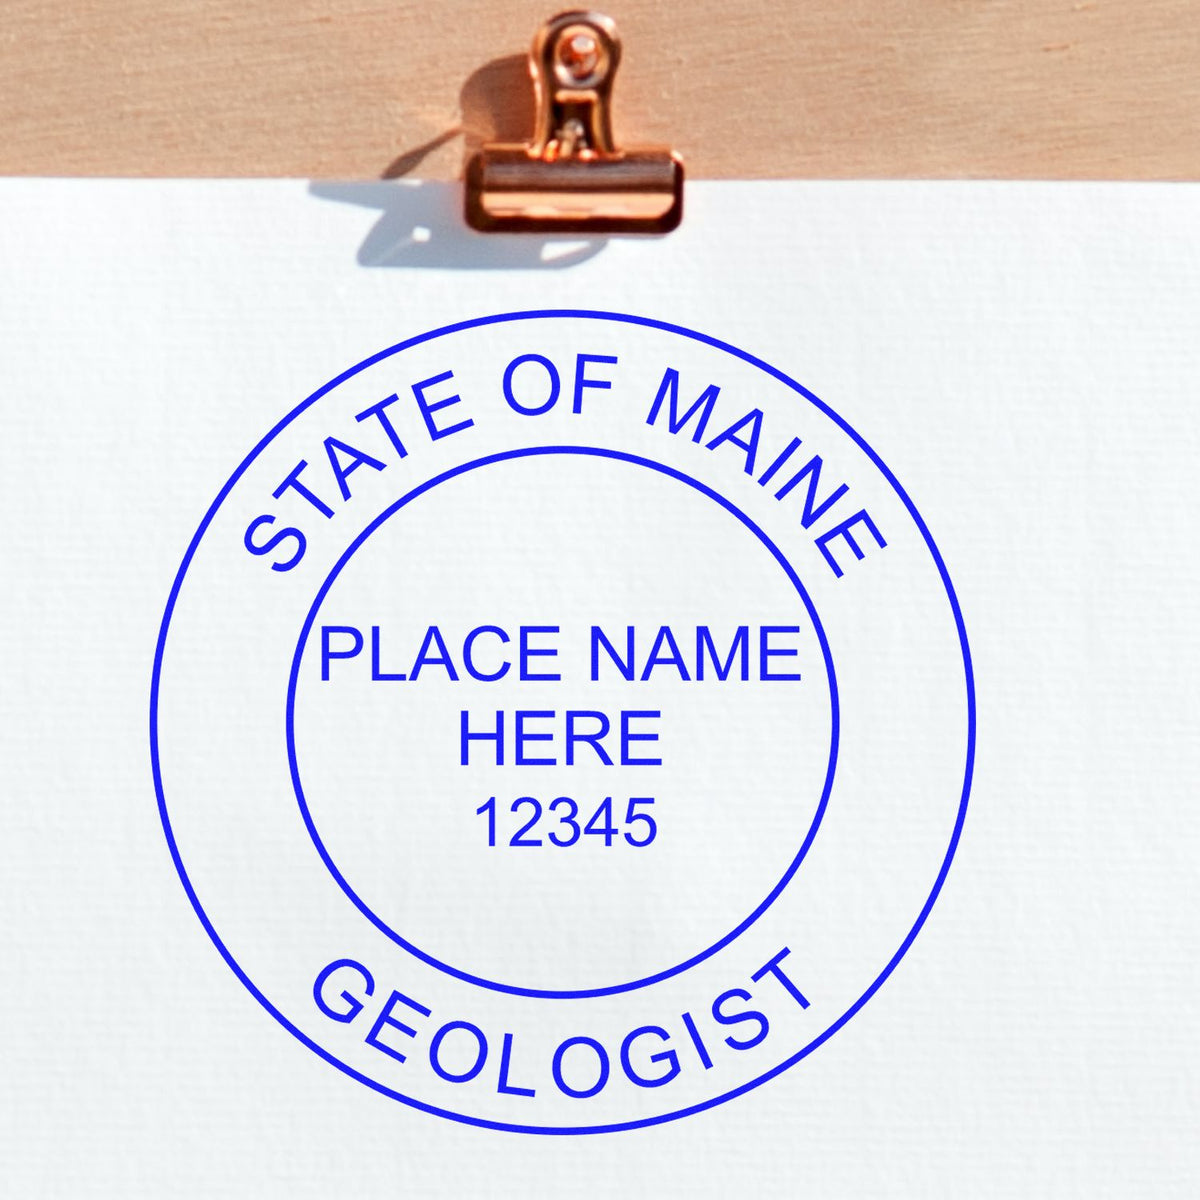 An alternative view of the Maine Professional Geologist Seal Stamp stamped on a sheet of paper showing the image in use